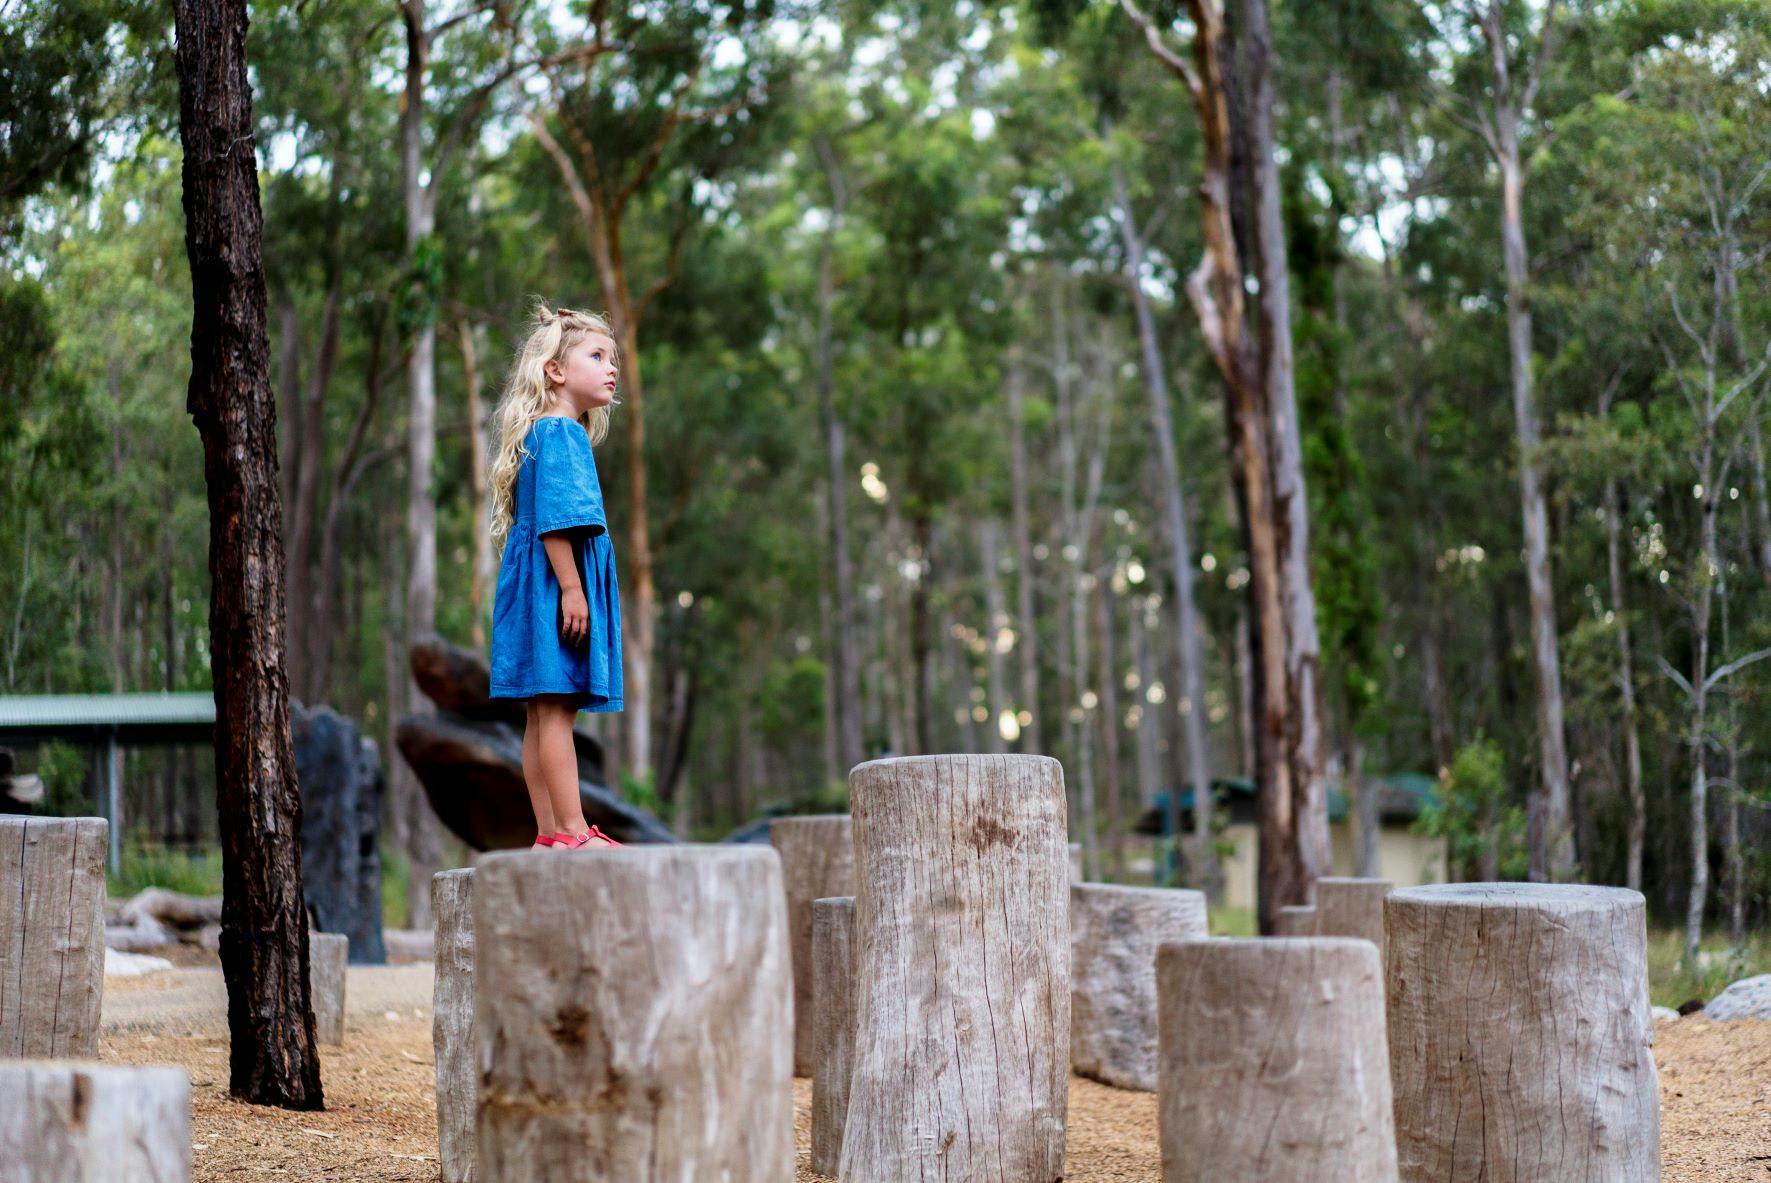 Girl balancing and jumping across the tree stumps.